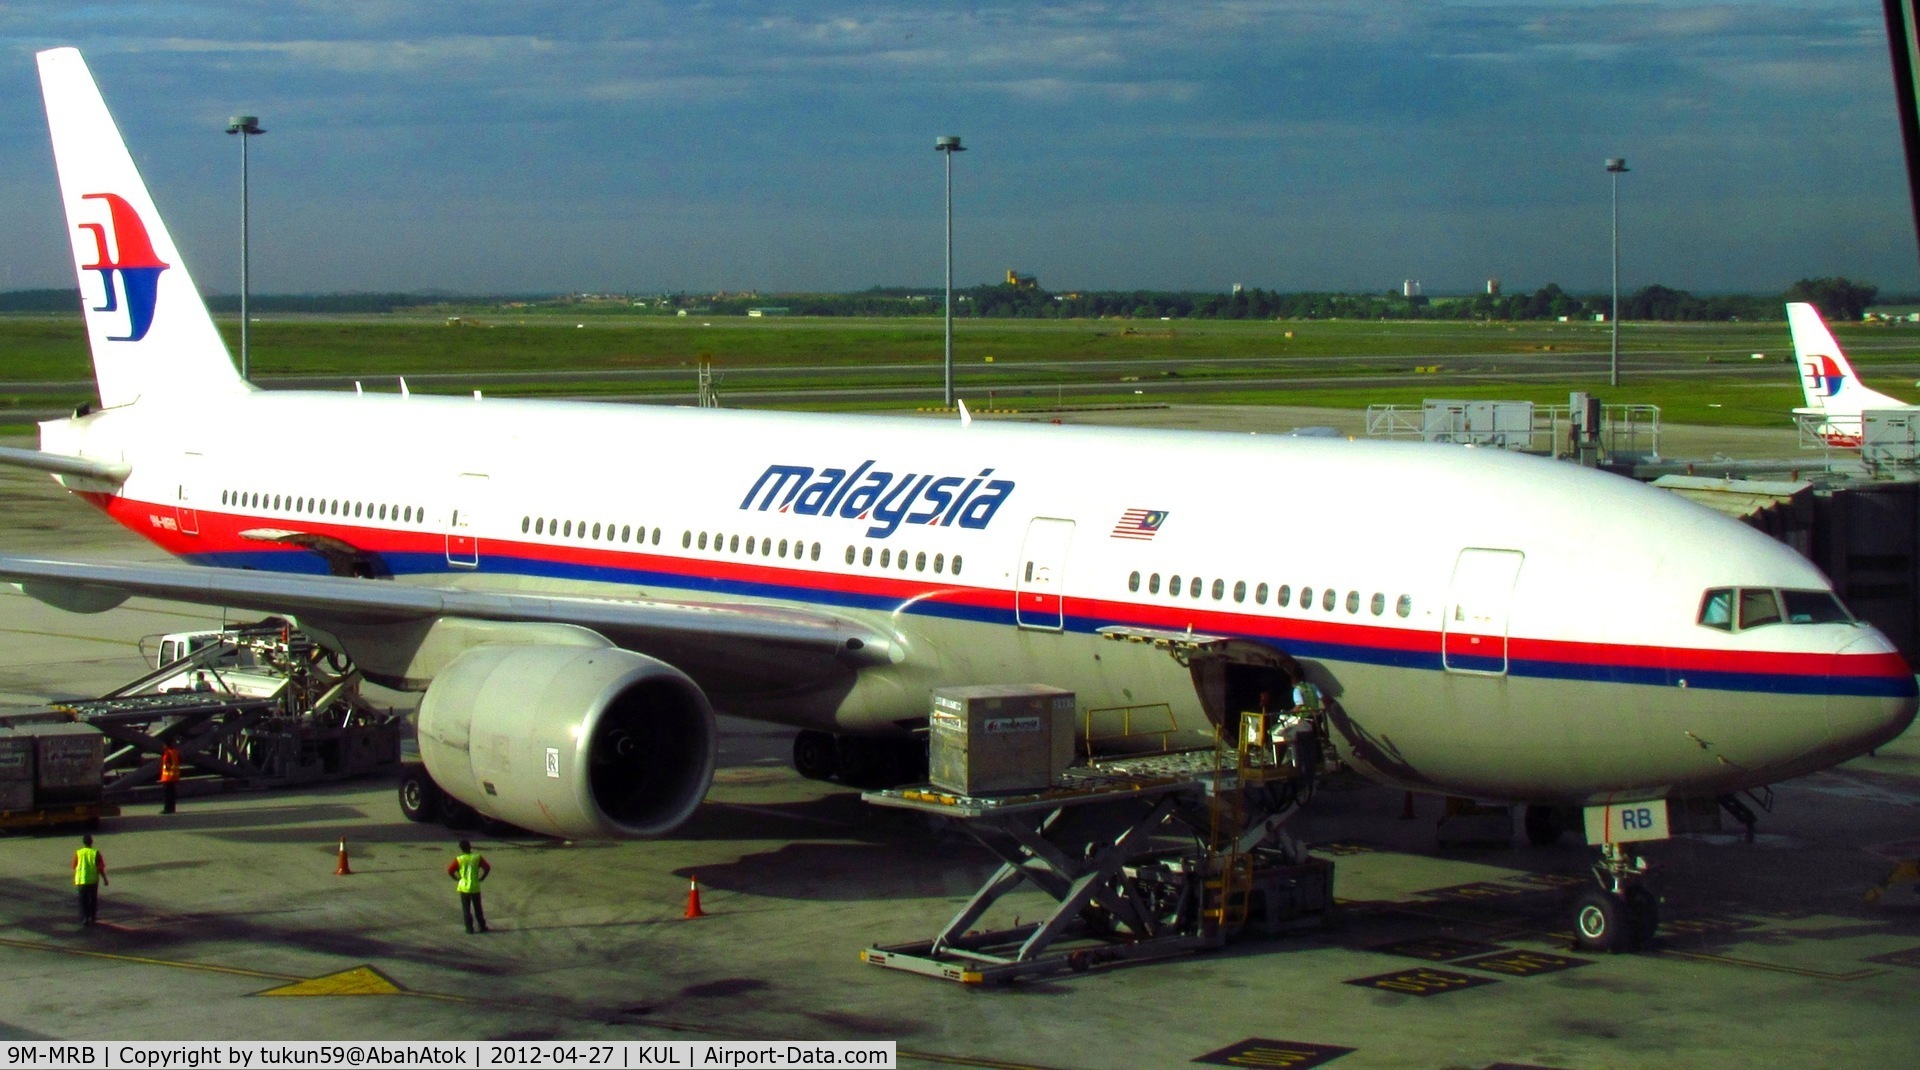 9M-MRB, 1997 Boeing 777-2H6/ER C/N 28409, Malaysia Airlines